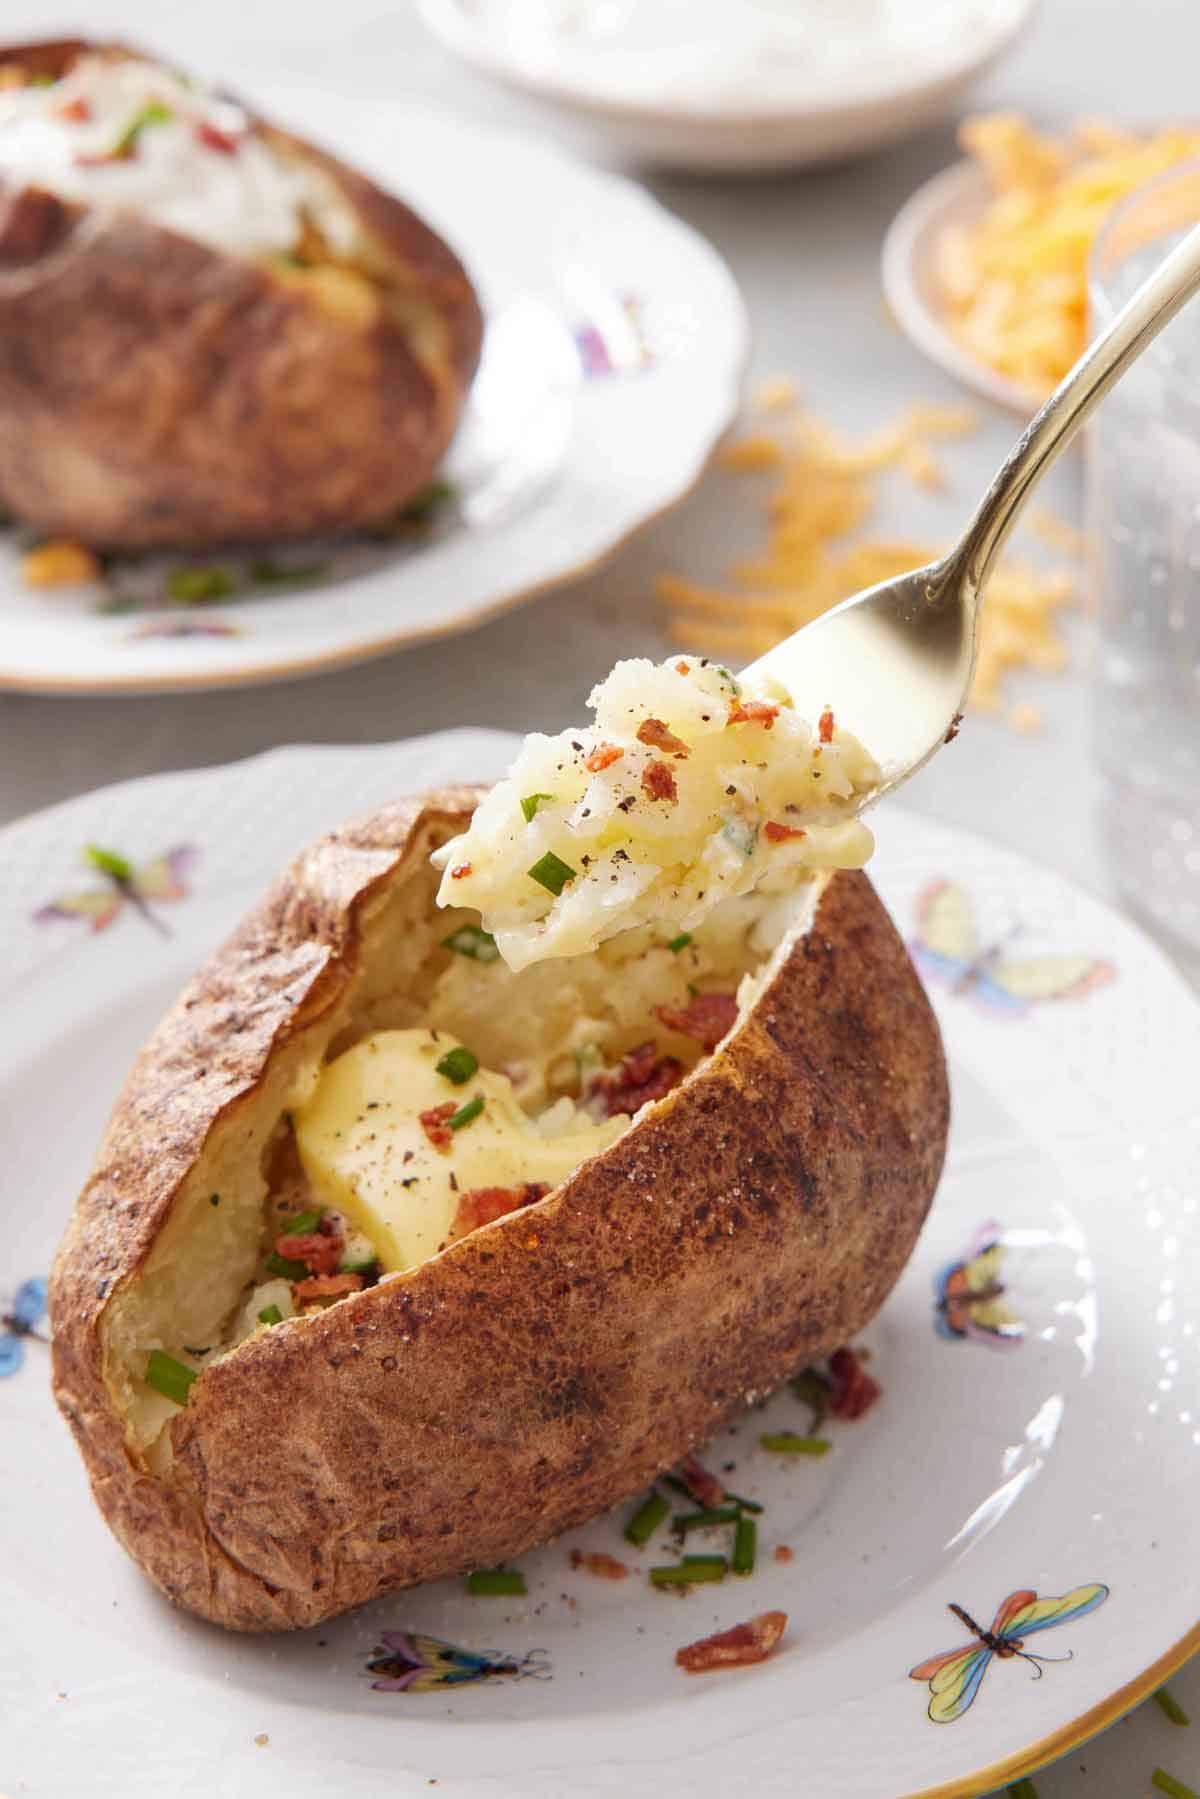 A fork lifting up a bite from a plate with a air fryer baked potato with chives, bacon, and pepper.